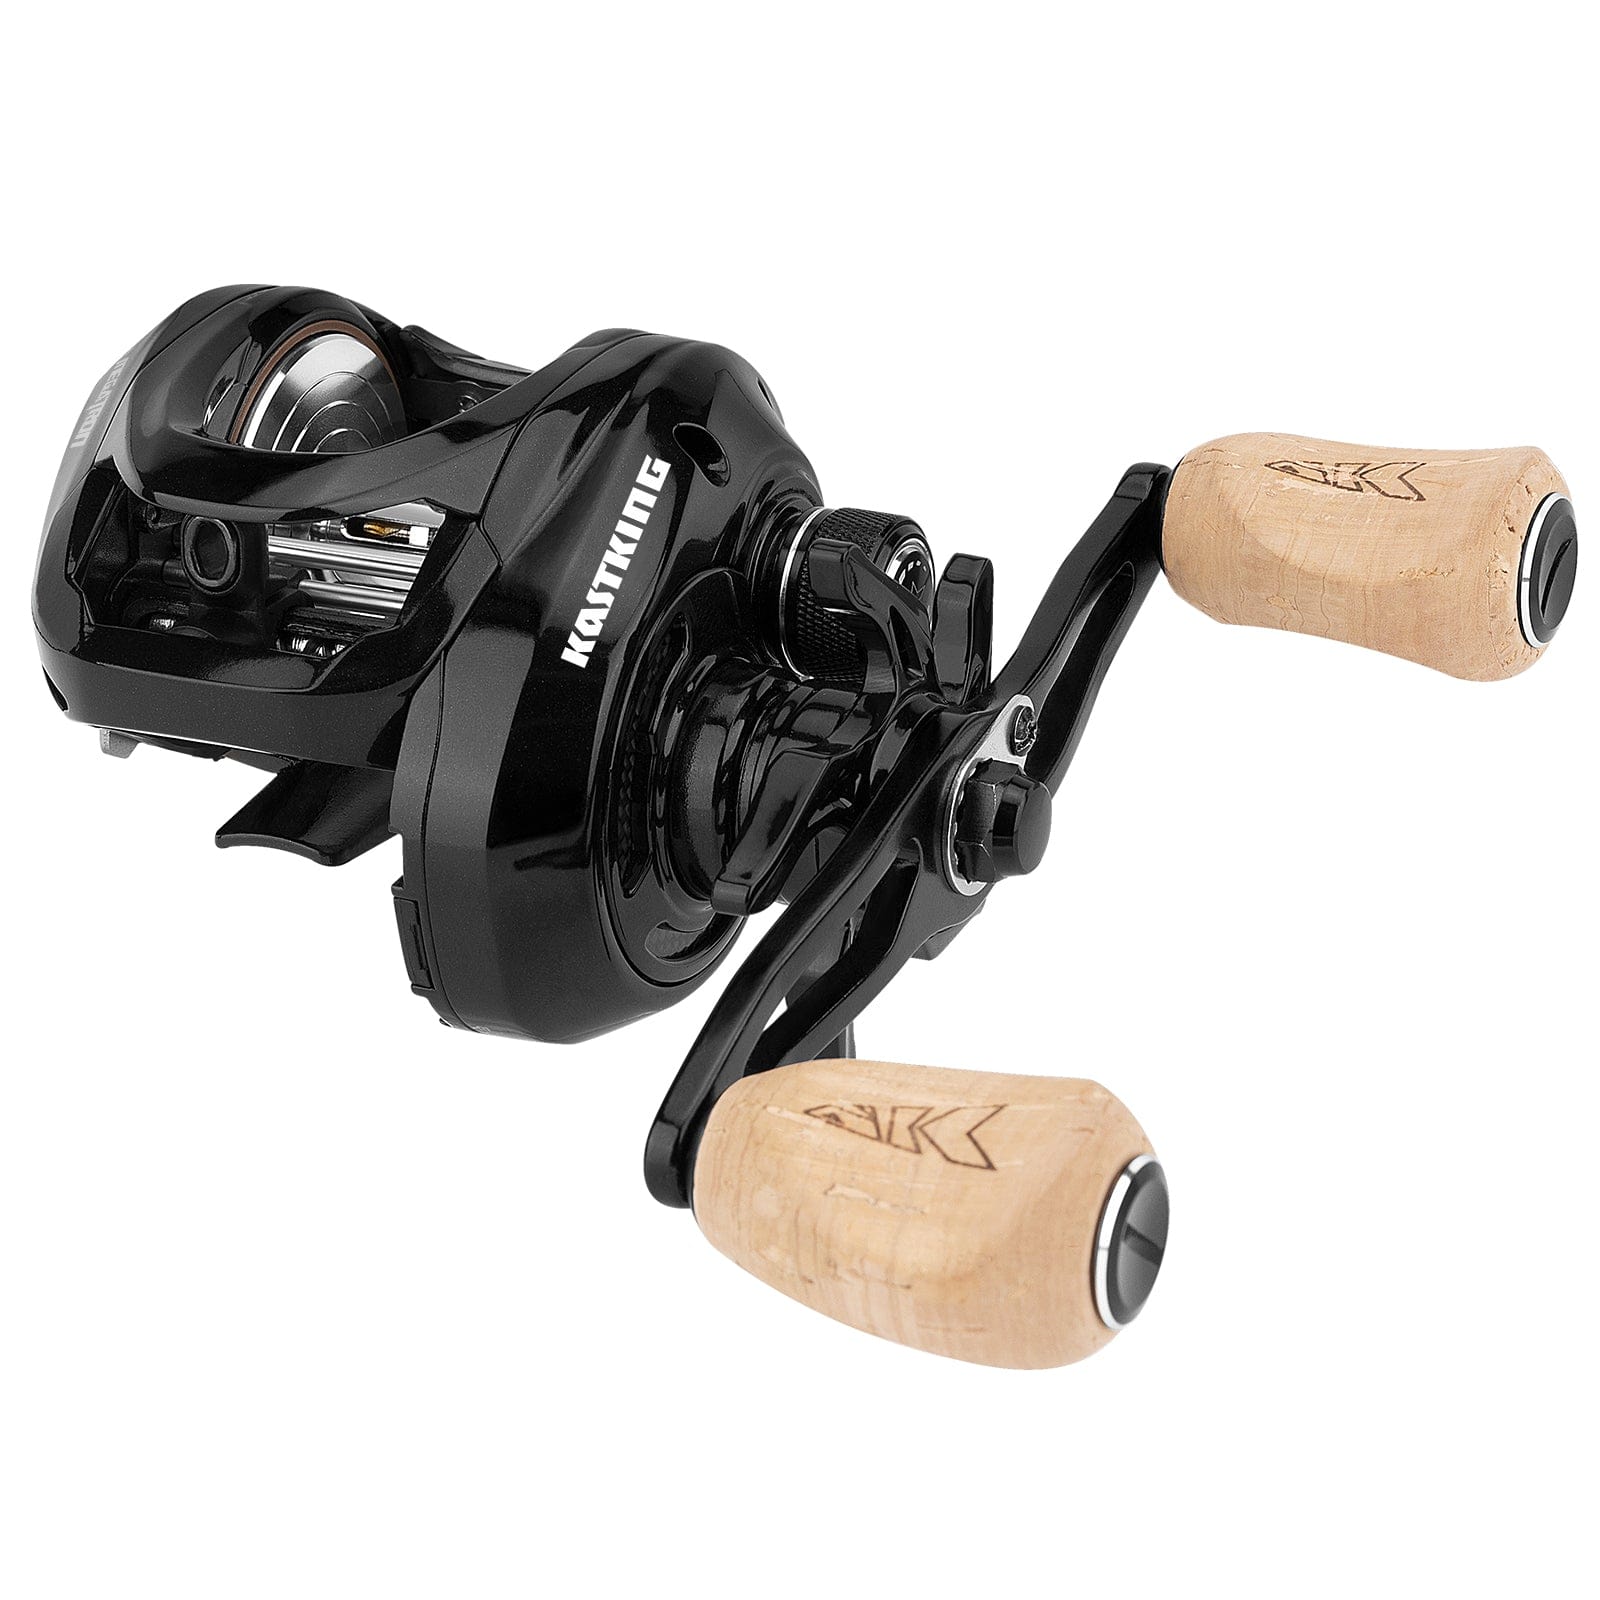 Billings Aw 200 Series Baitcasting Reel 6 3 1 Gear Ratio 18lb Max Drag  Perfect For Freshwater Saltwater Fishing, Buy More, Save More